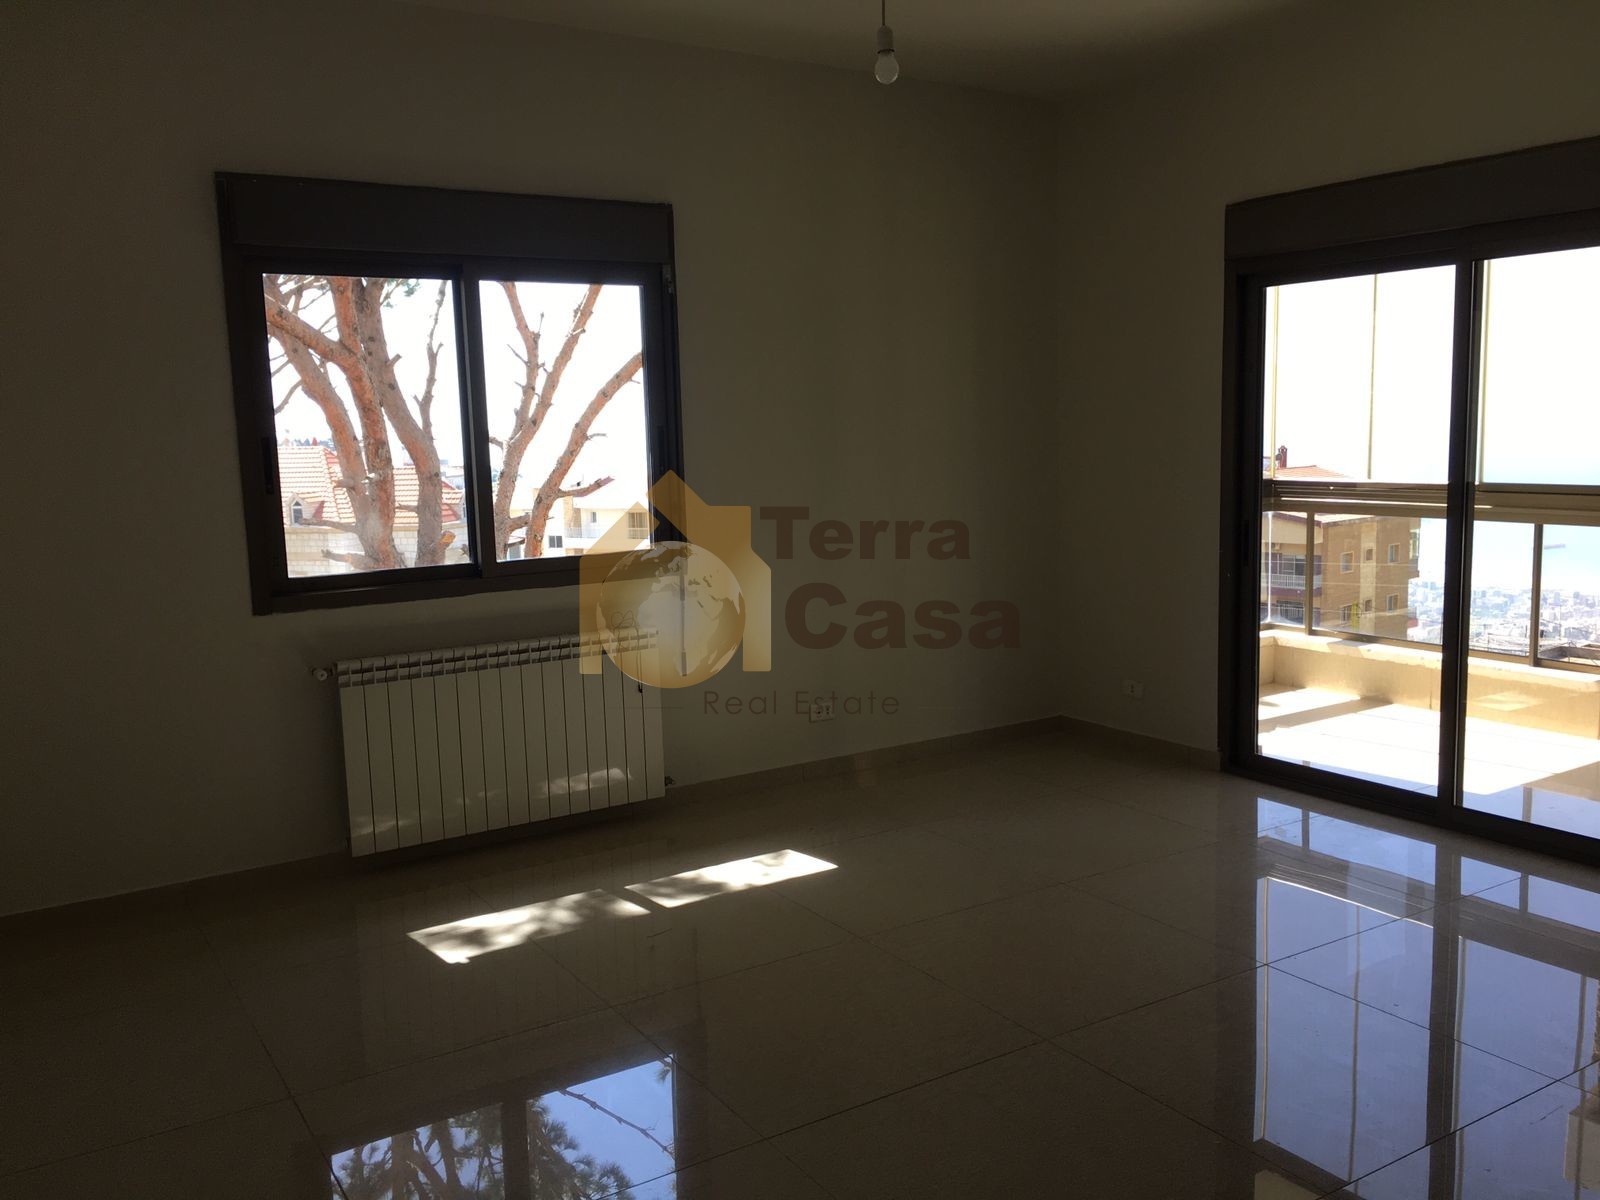 Sale apartment in Roumieh with terrace 25 sqm cash payment